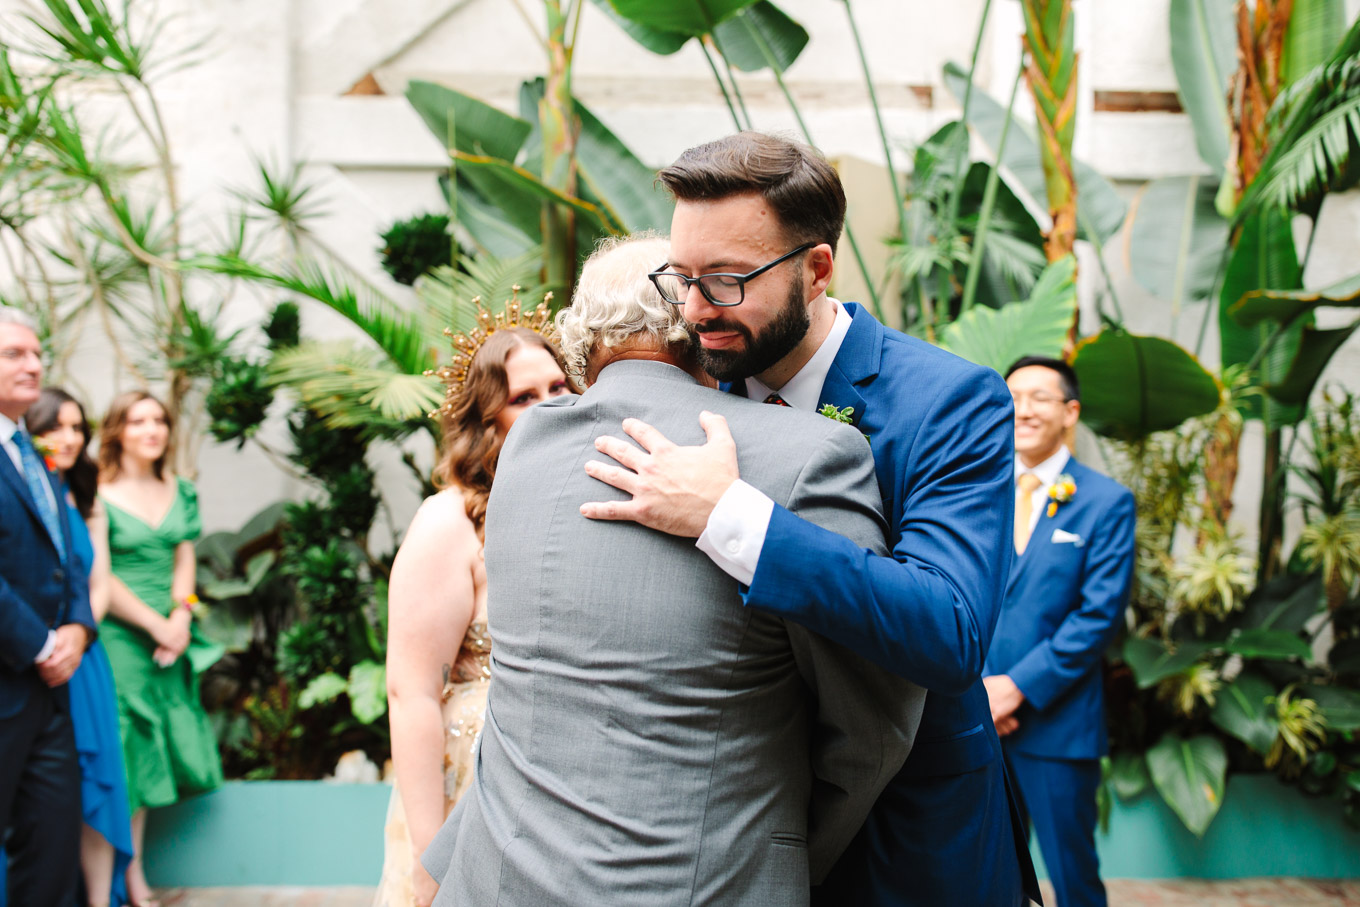 Groom hugging father of the bride | Colorful Downtown Los Angeles Valentine Wedding | Los Angeles wedding photographer | #losangeleswedding #colorfulwedding #DTLA #valentinedtla   Source: Mary Costa Photography | Los Angeles